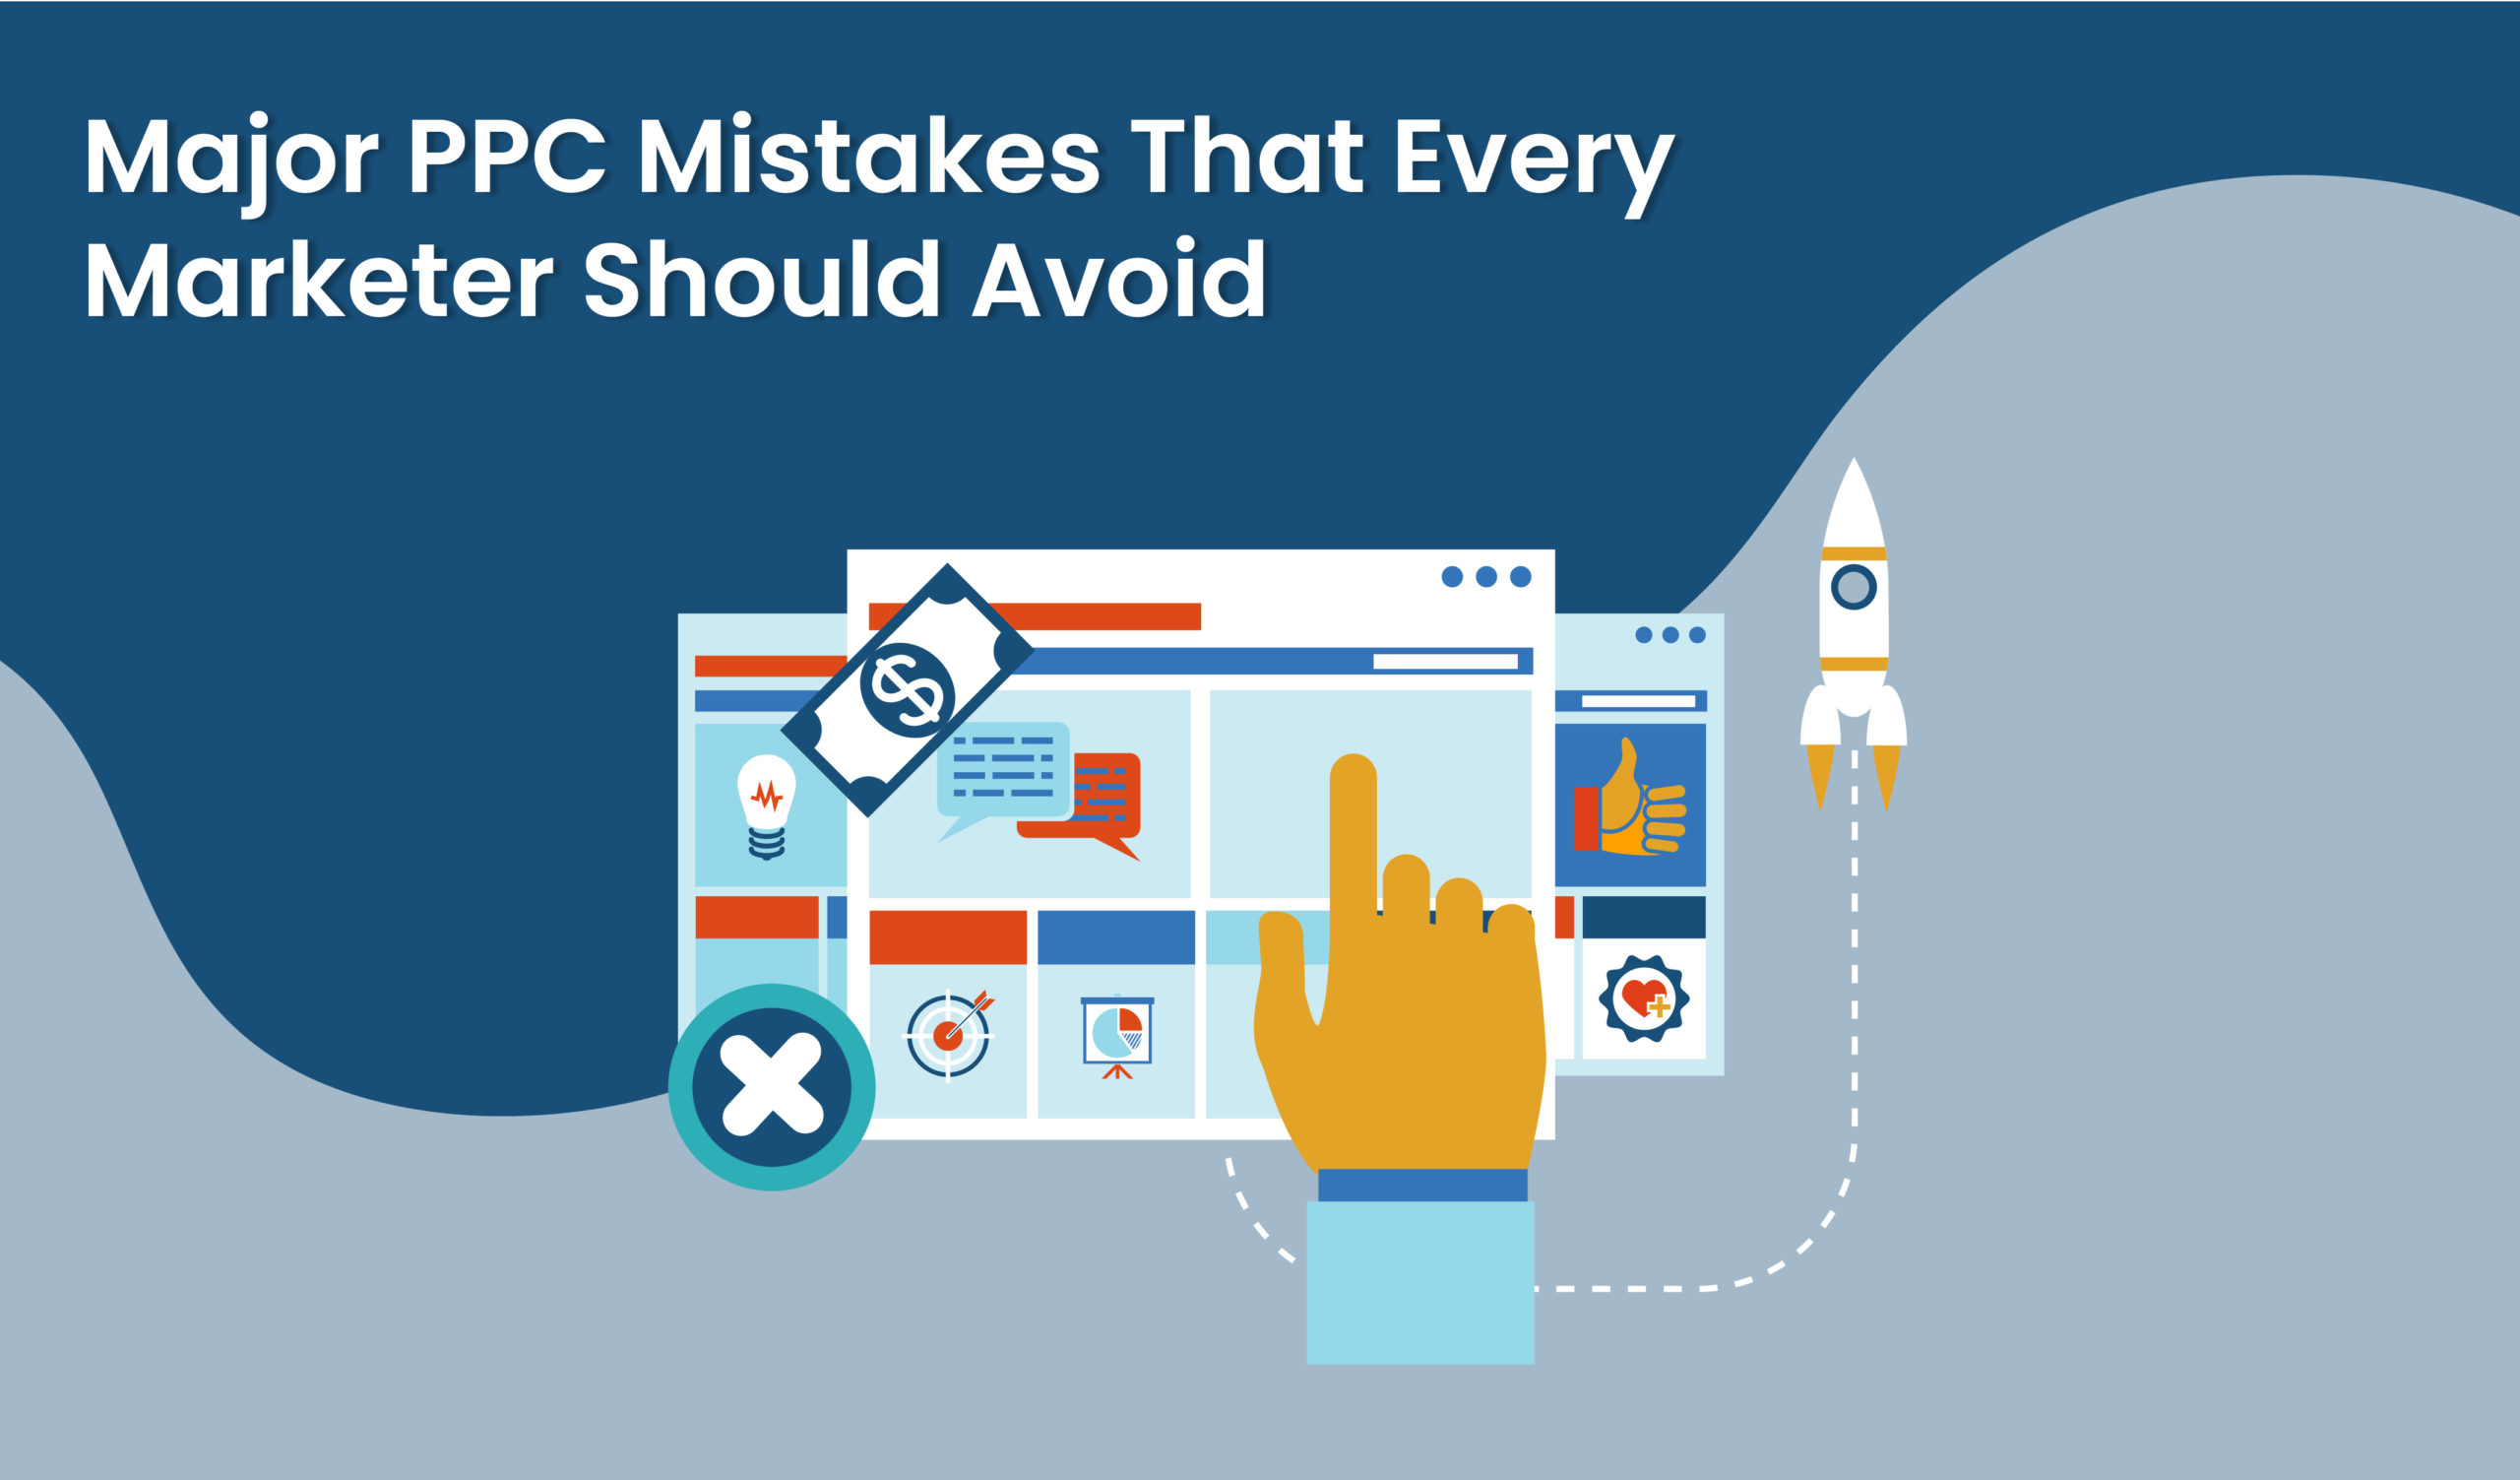 Major PPC mistakes that every marketer should avoid